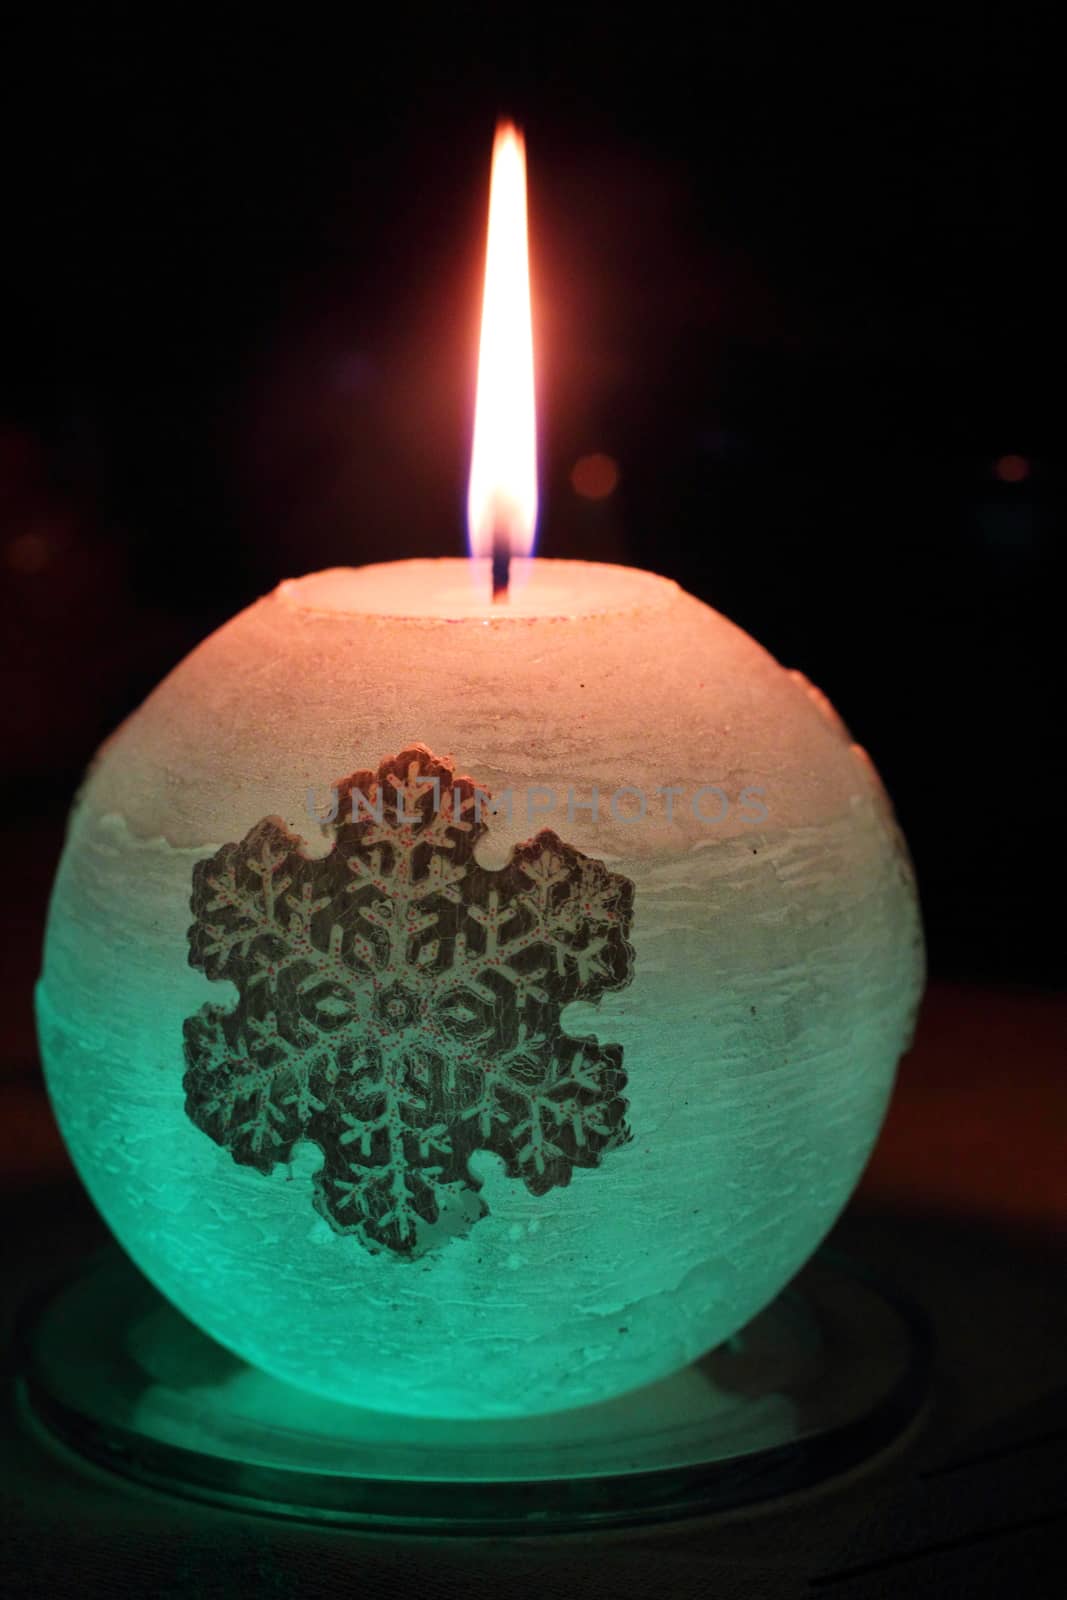 Glowing candle with a diode and snowflake lights up in the dark